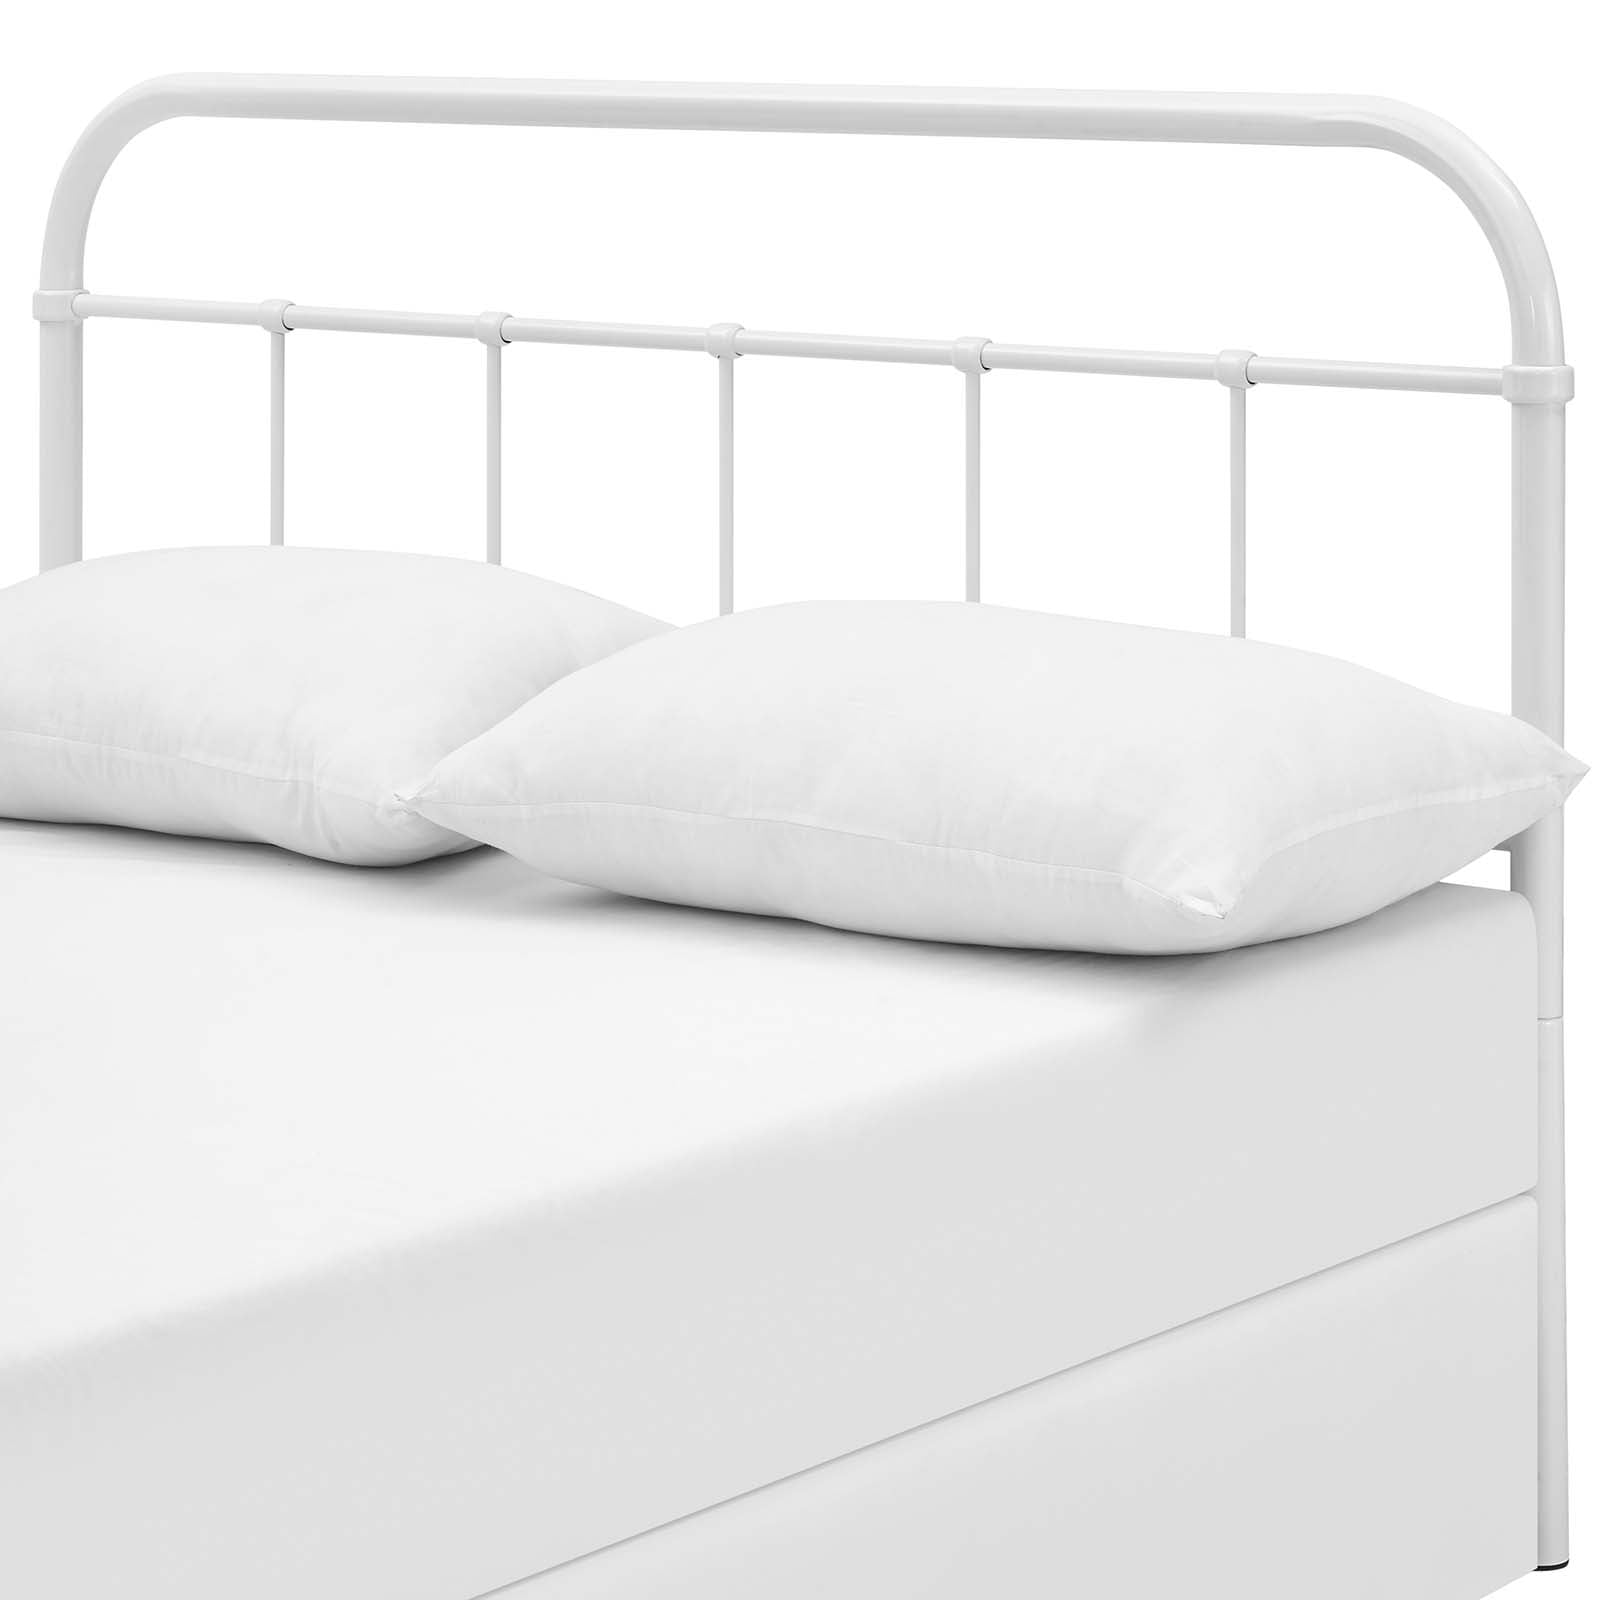 Mainstays Tempo Full Queen Adaptable, Mainstays Tempo Full Queen Metal Headboard White